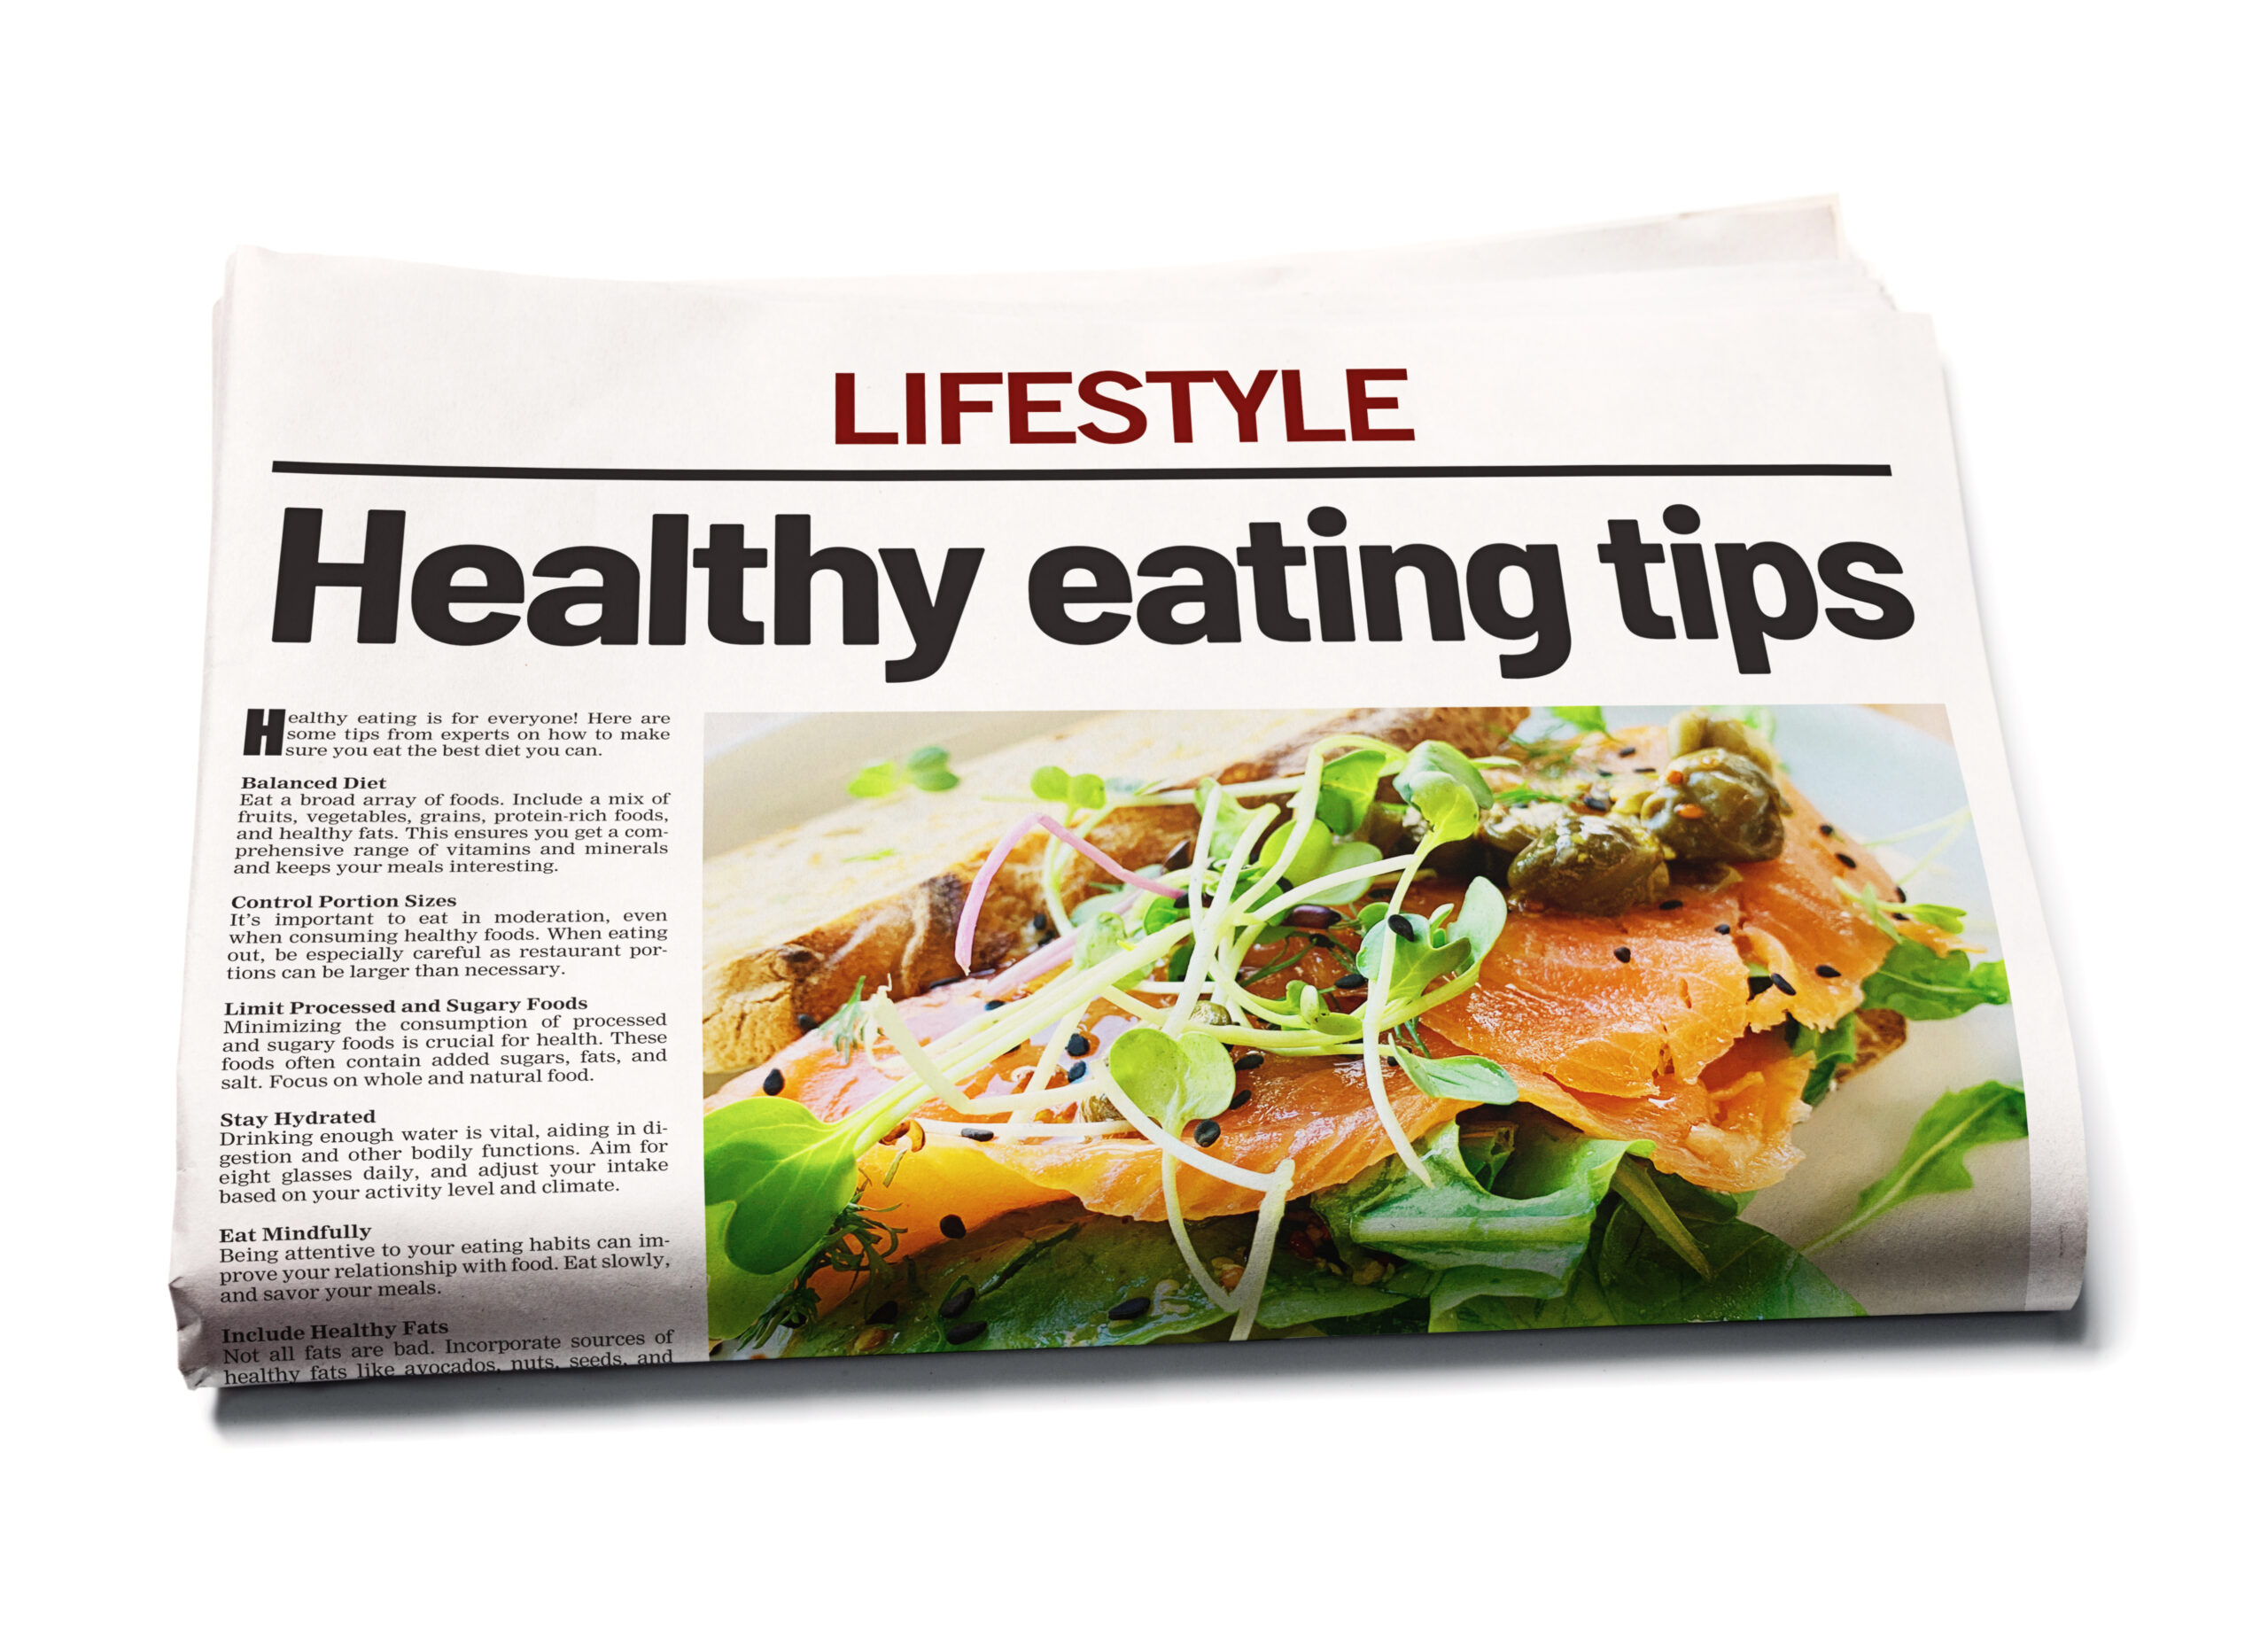 Front page of simulated newspaper lifestyle section is headlined "Healthy eating tips". The layout and photograph are by the photographer, and the text was extensively rewritten by the photographer with reference to a variety of public health sources. The text passes the plagiarism check at https://plagiarismdetector.net/